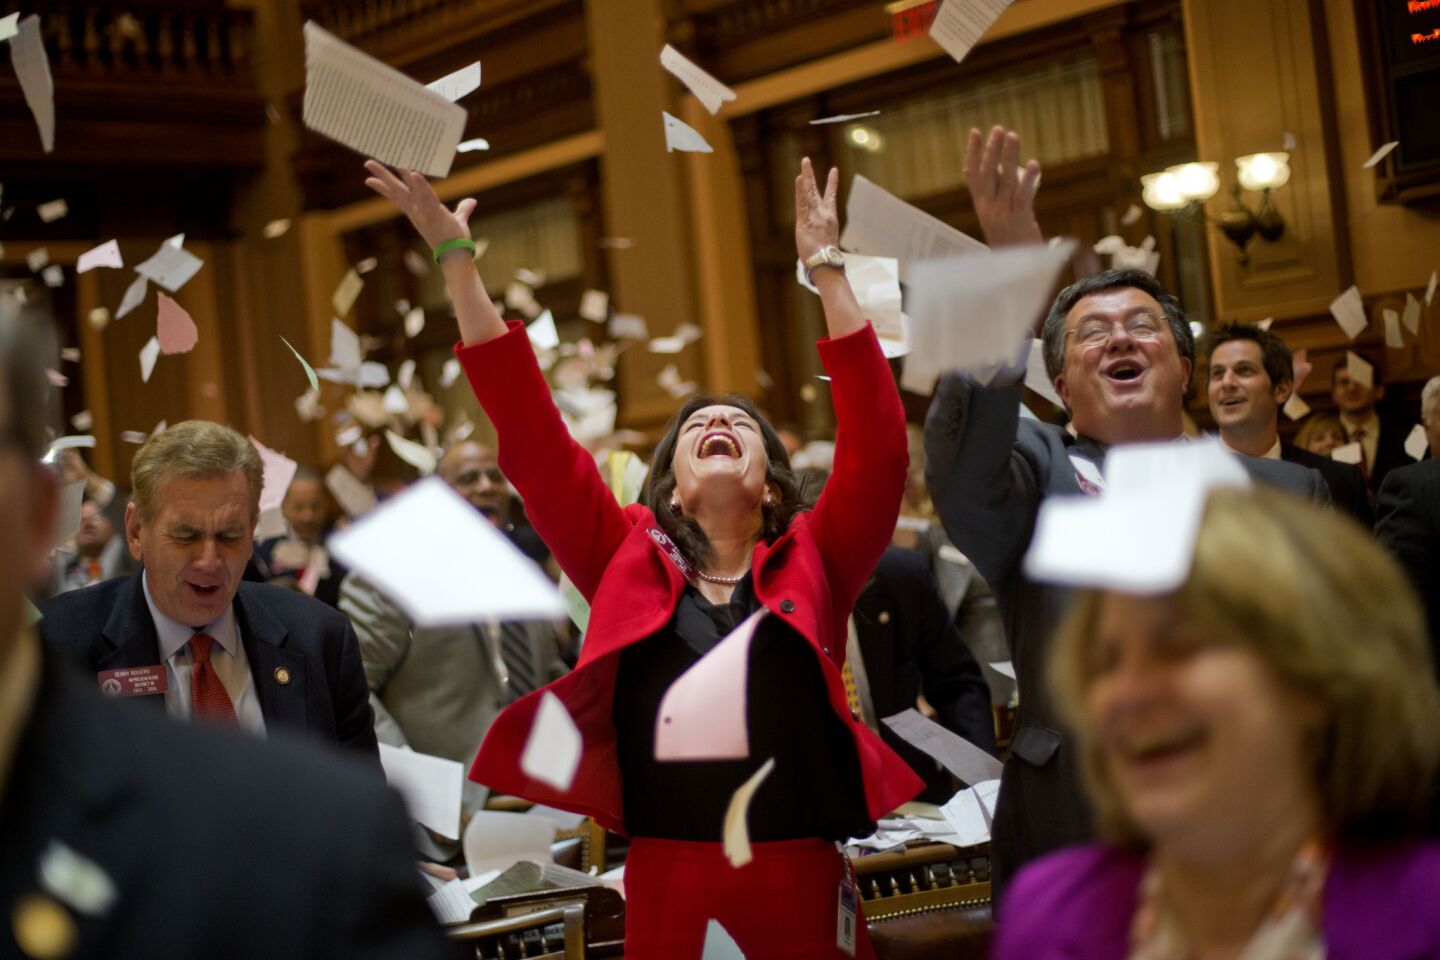 Georgia Republican state legislators Mandi Ballinger, center, Terry Rogers, left, and Rick Jasperse, right, throw up paper from their desks at the conclusion of the legislative session in the House chamber in Atlanta.